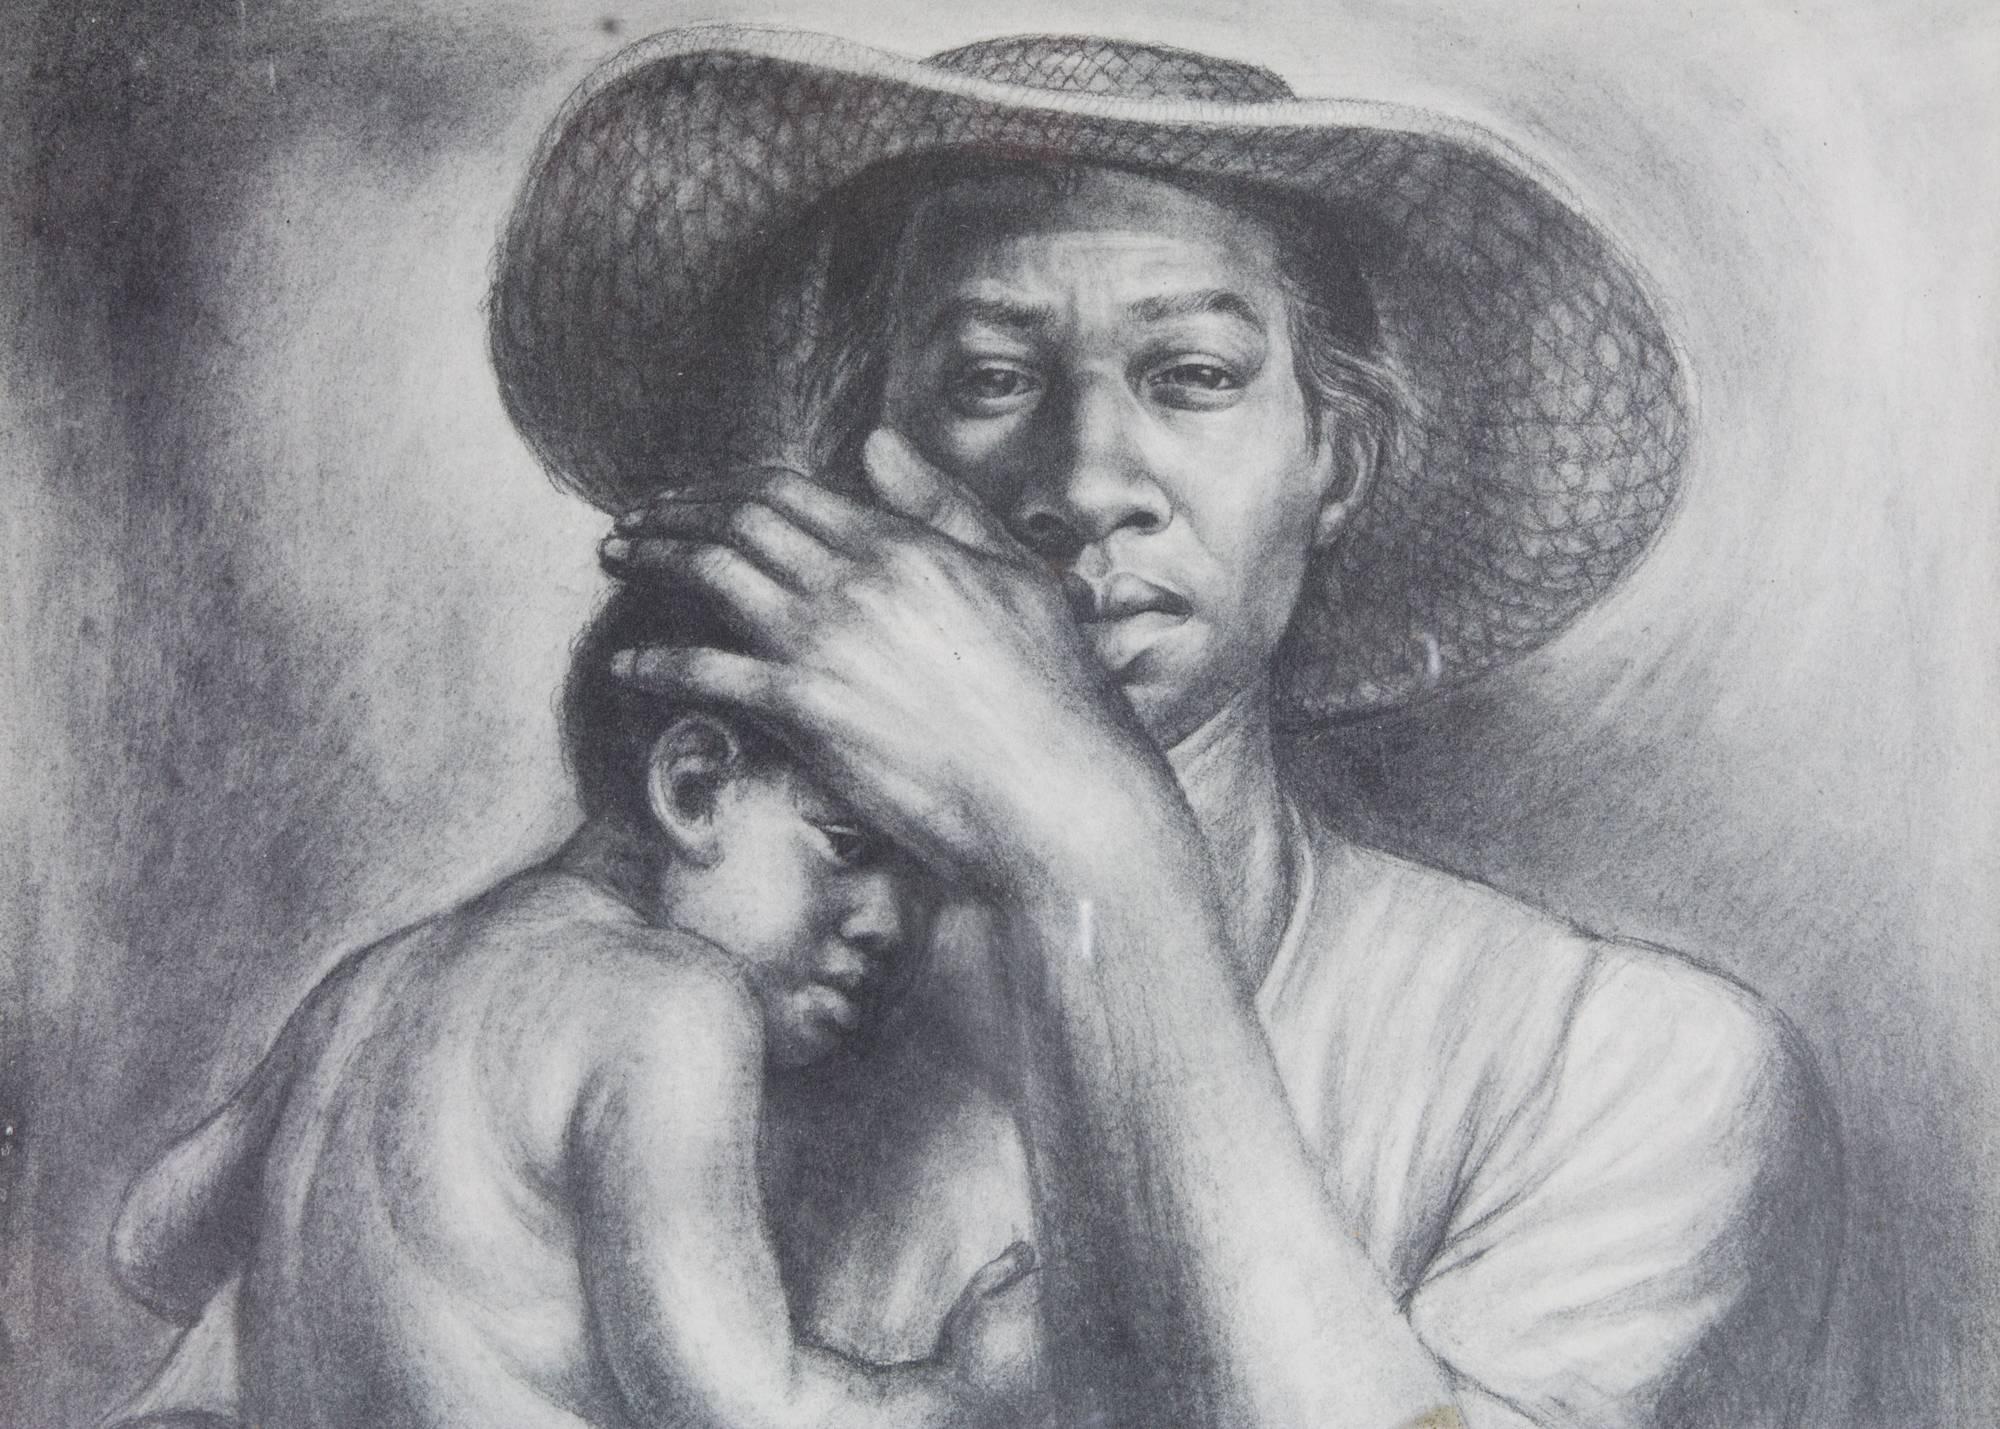 'The Mother' by Charles White as part of a collection of six lithographs published in 1953. Plate signed in lower right corner. 

Born in Chicago in 1918, Charles W. White is one of America's most renowned and recognized African-American and